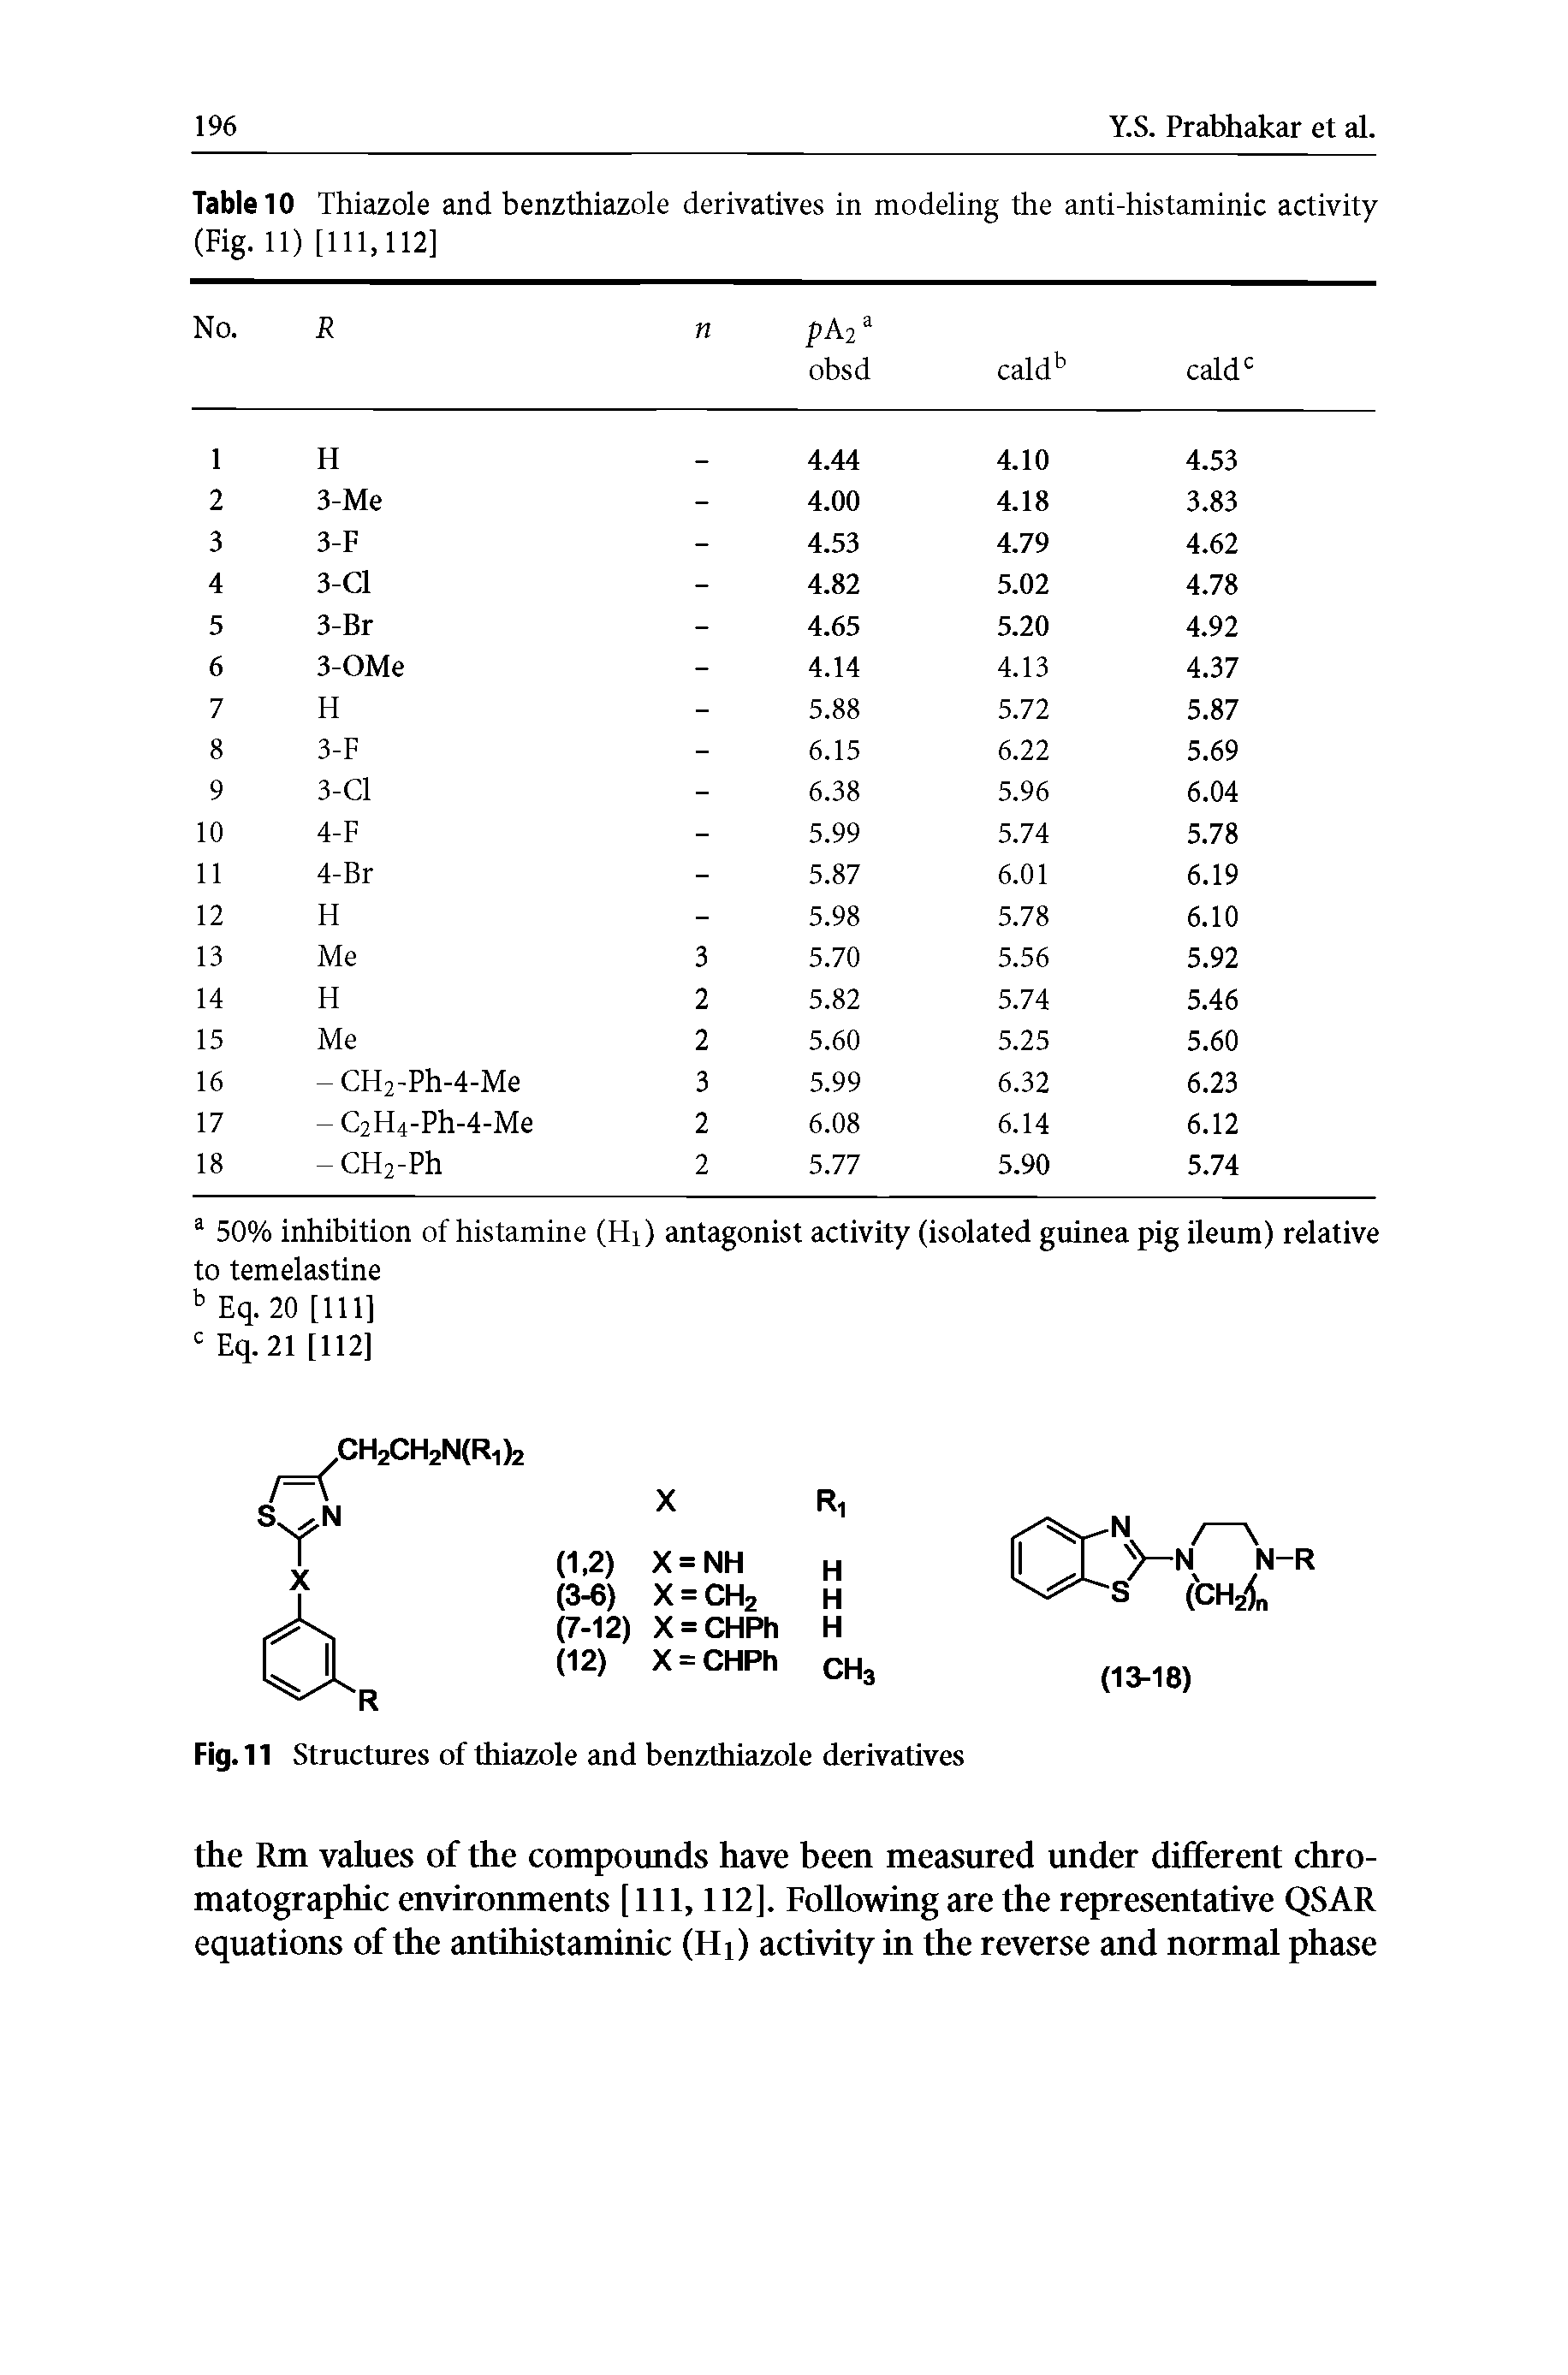 Table 10 Thiazole and benzthiazole derivatives in modeling the anti-histaminic activity (Fig. 11) [111,112] ...